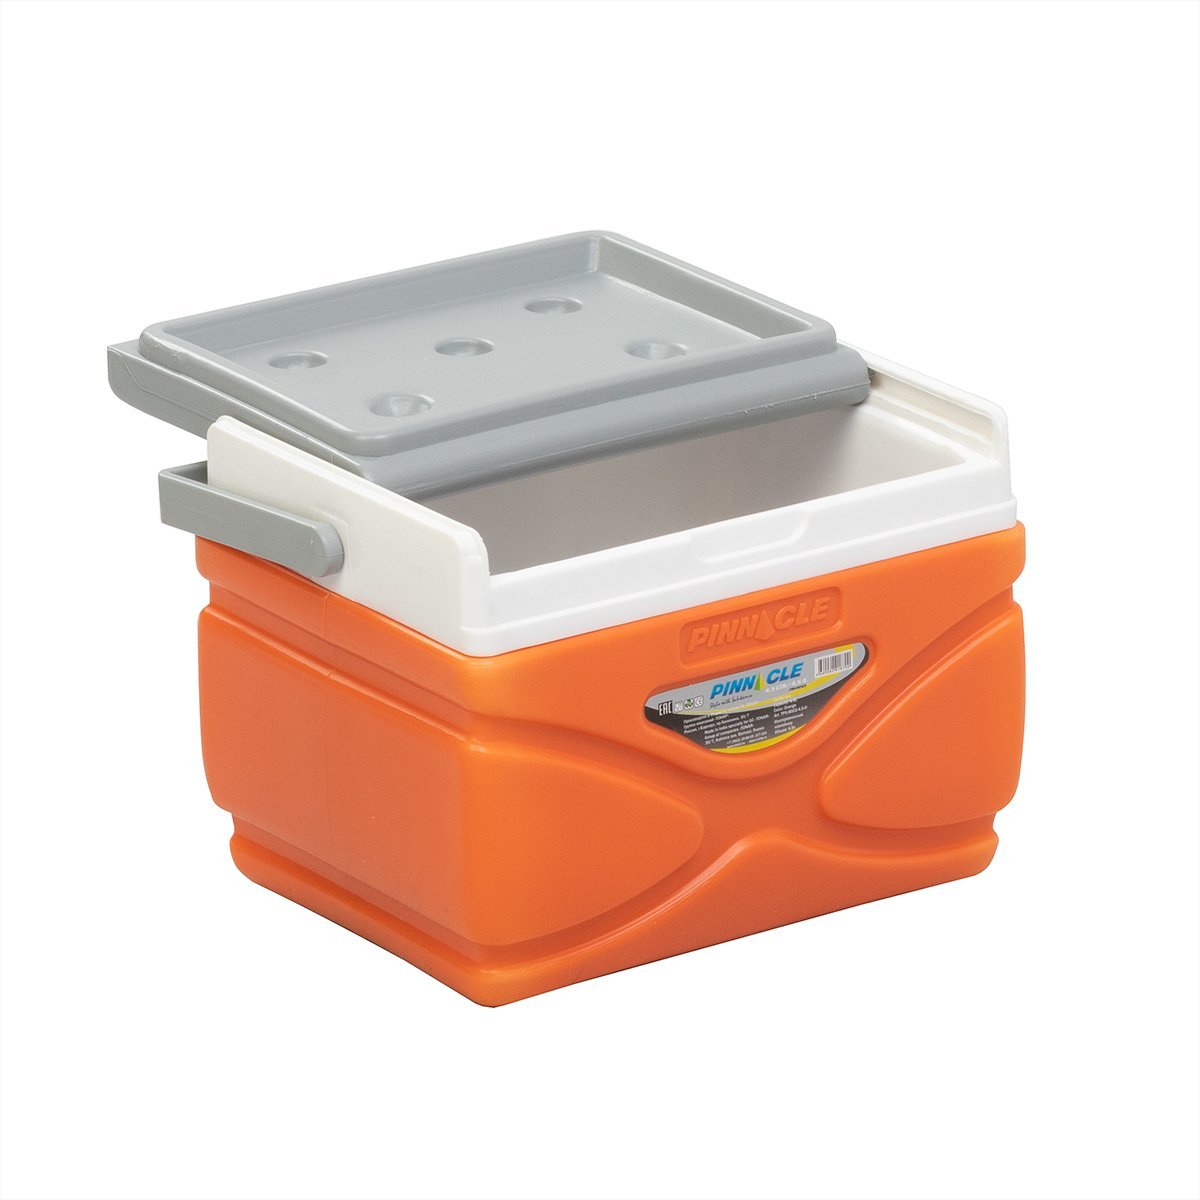 Prudence Portable Hard-Sided Ice Chest for Camping, 4 qt, with handle, orange color with a lid half opened